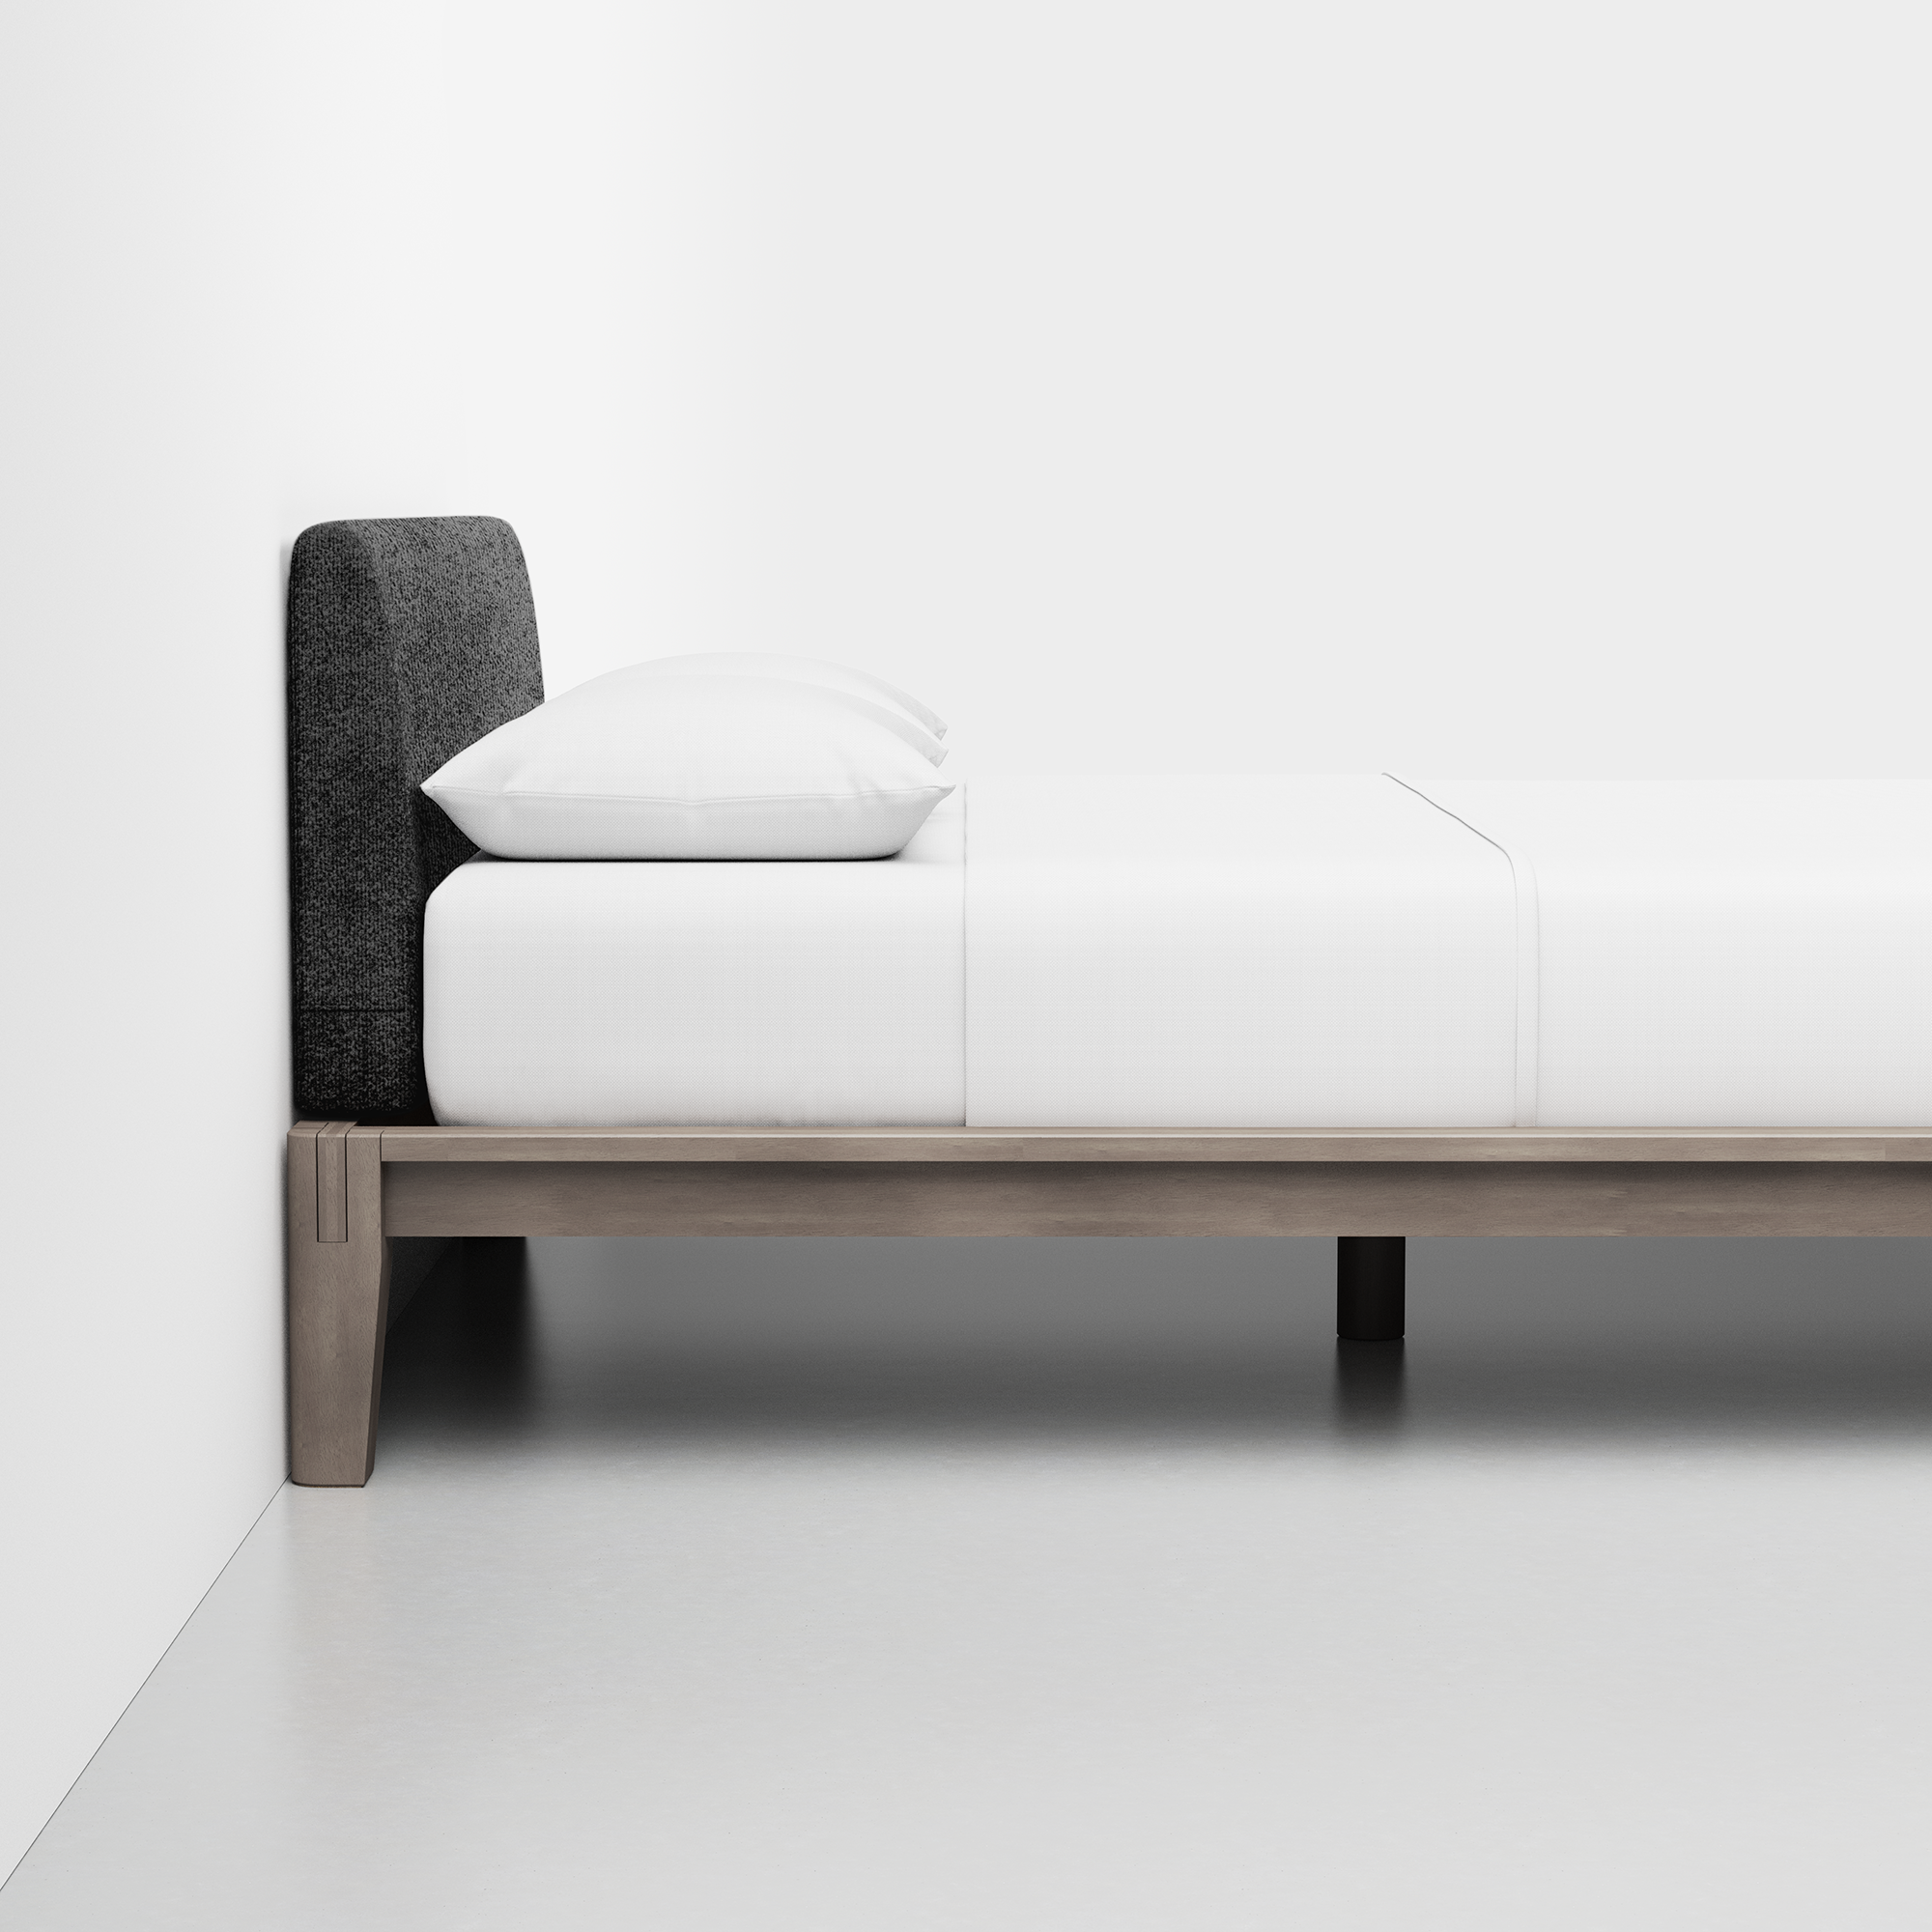 The Bed (Grey / Graphite) - Render - Side